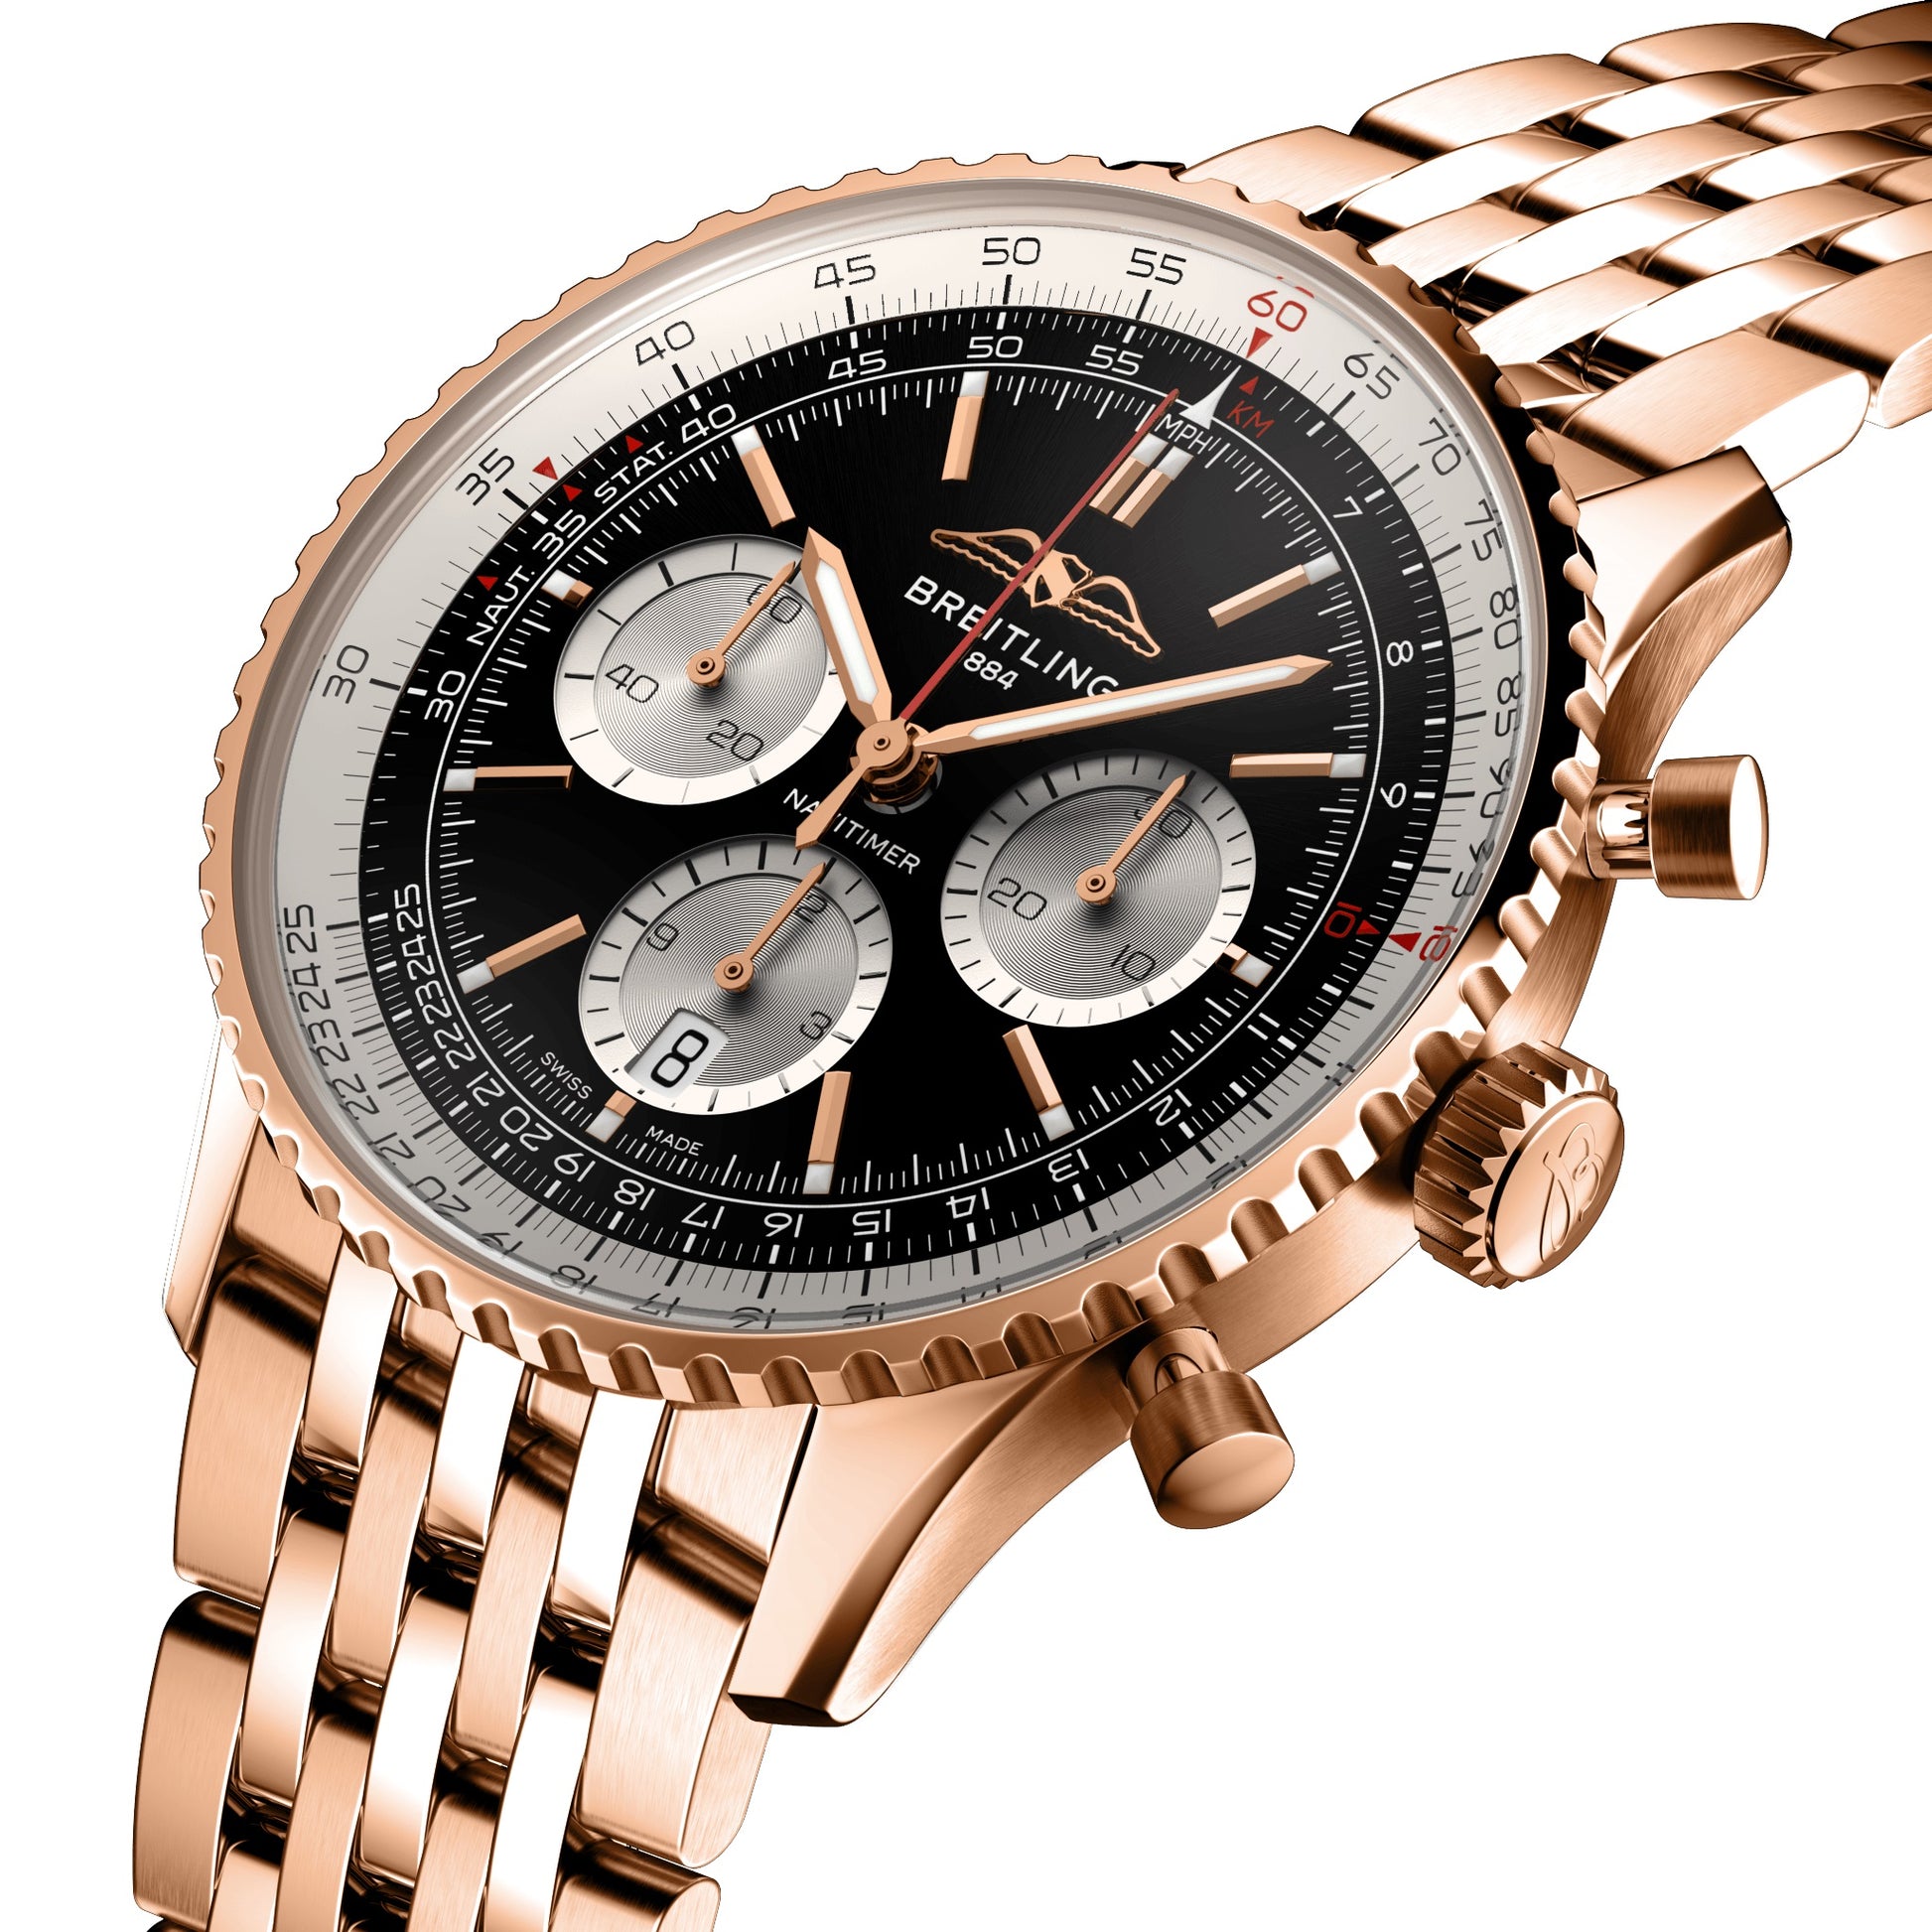 Breitling Navitimer B01 Chronograph 46 Red Gold and Black Leather Strap  Watch, RB0137241G1P1